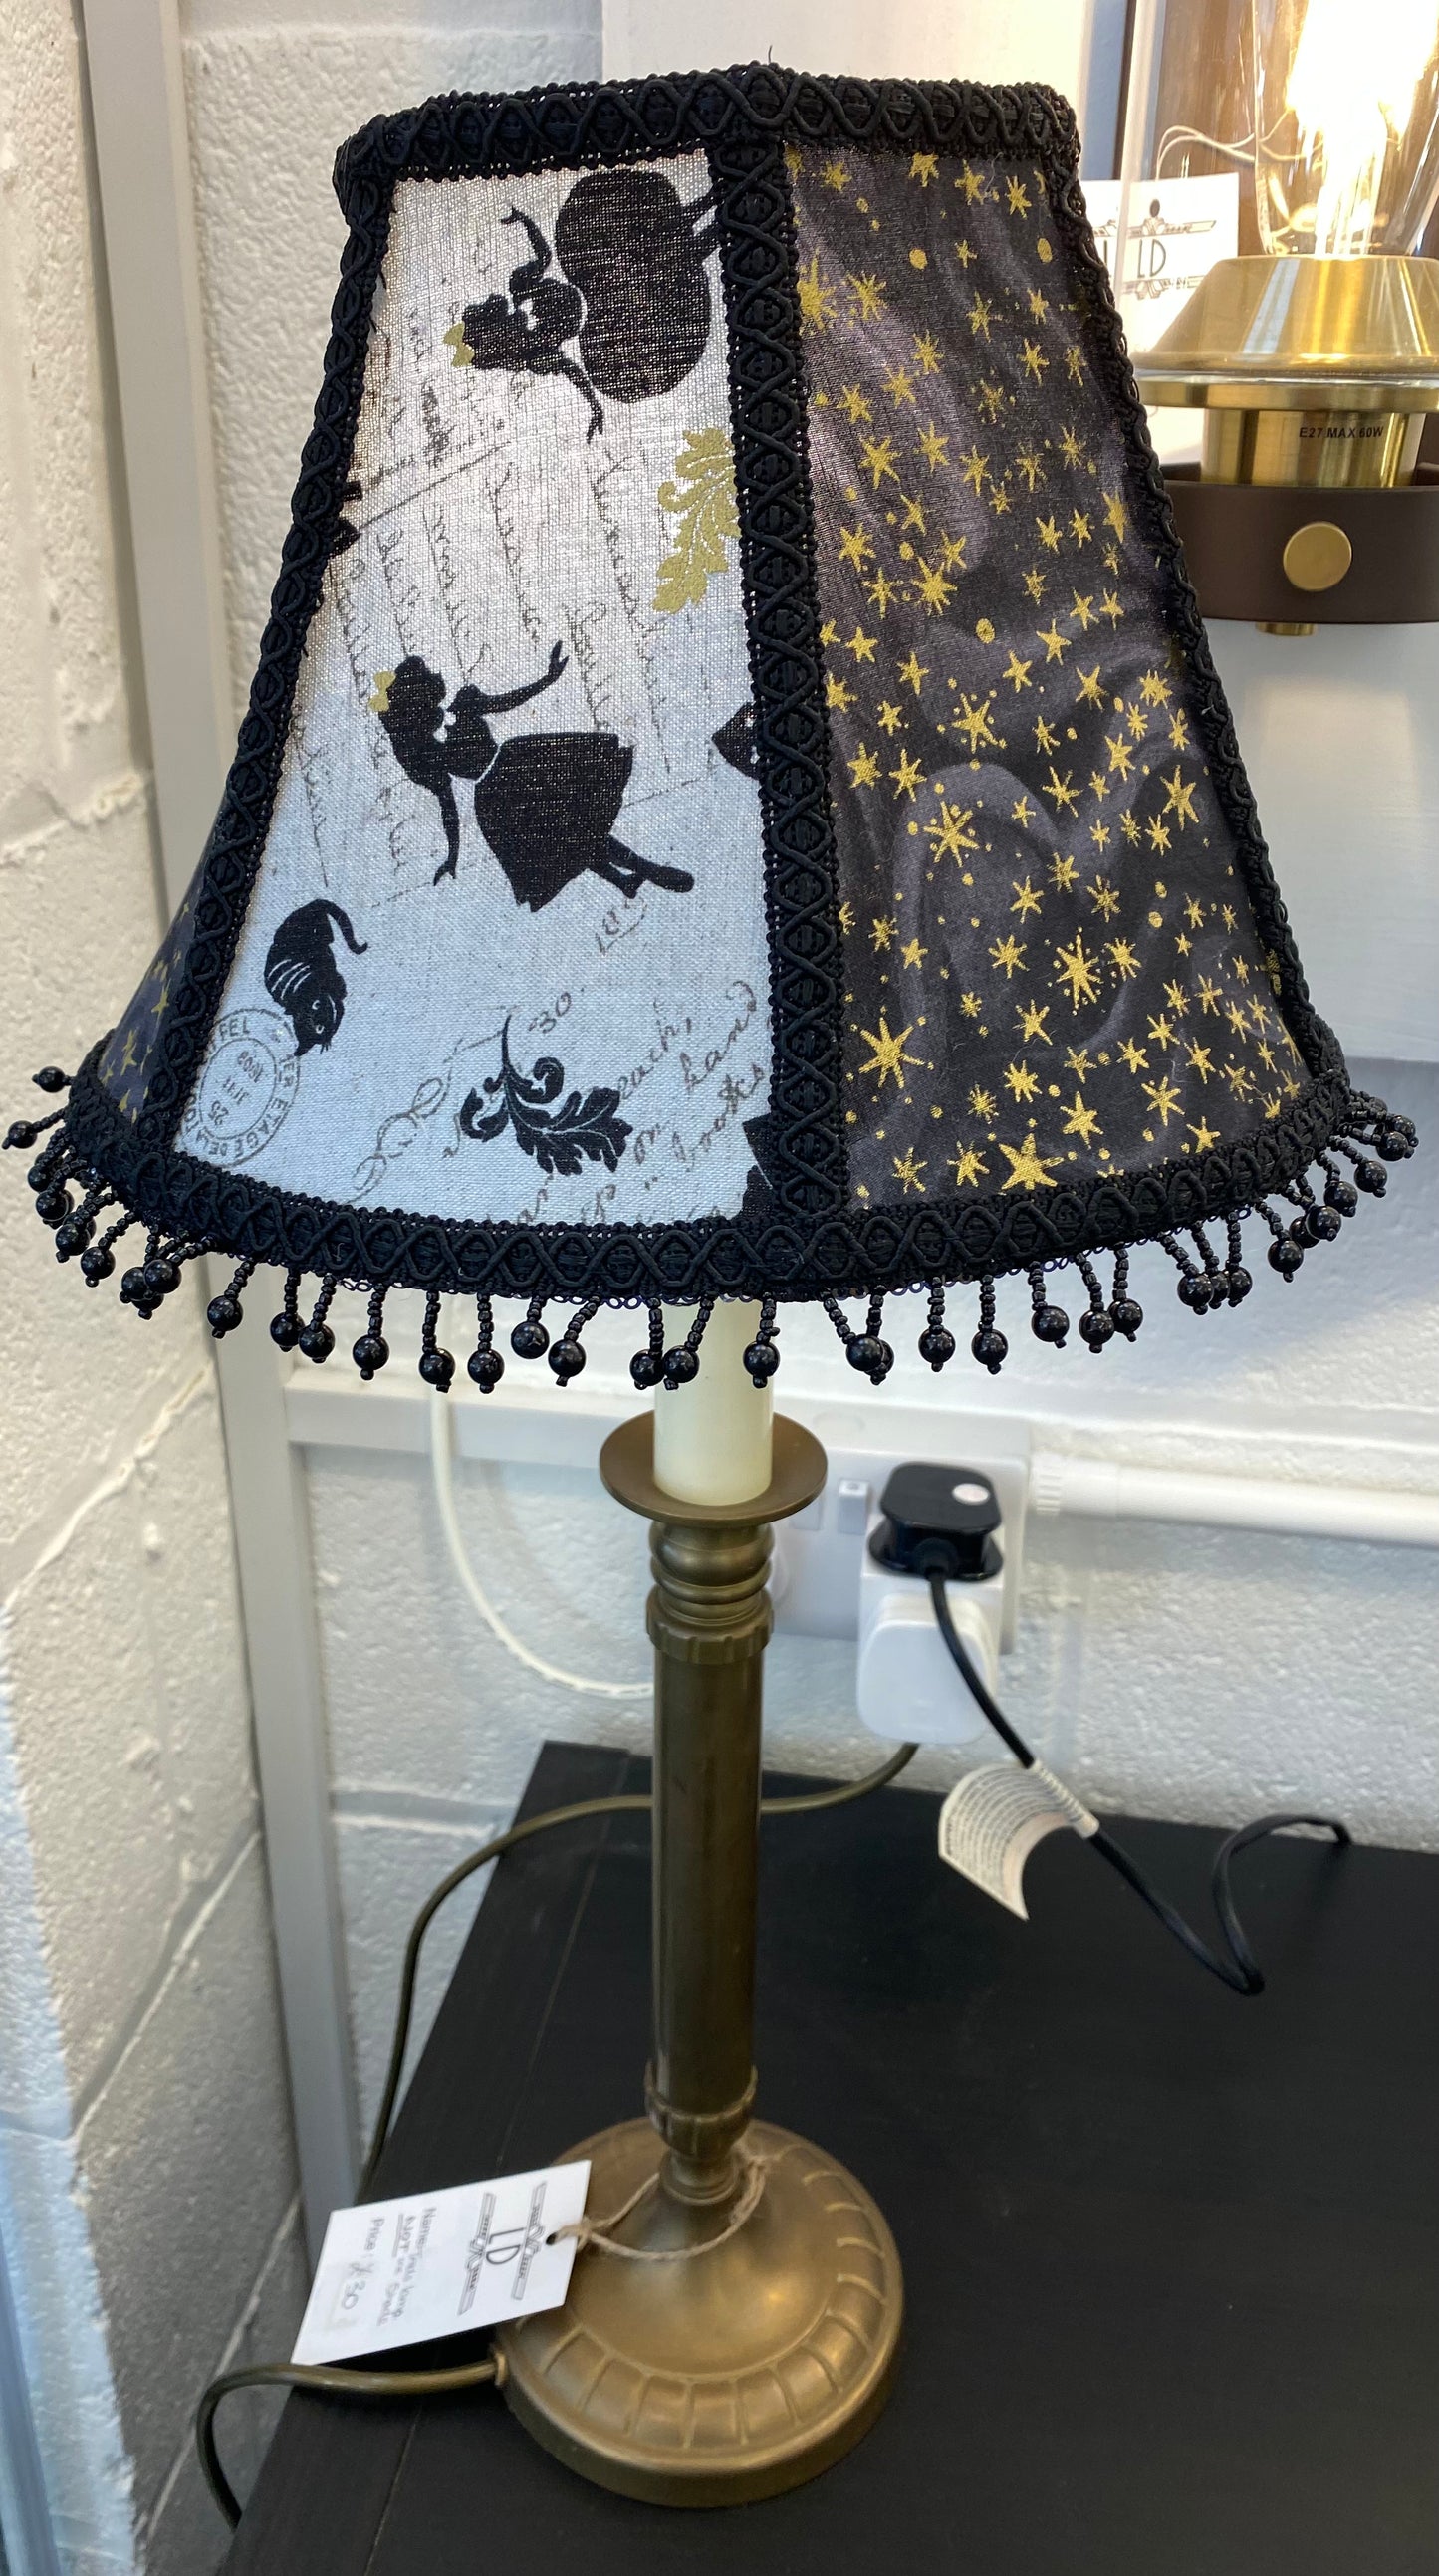 Medium Hand Crafted One of a Kind Victorian Style Lampshade - Wonderland (shadow)